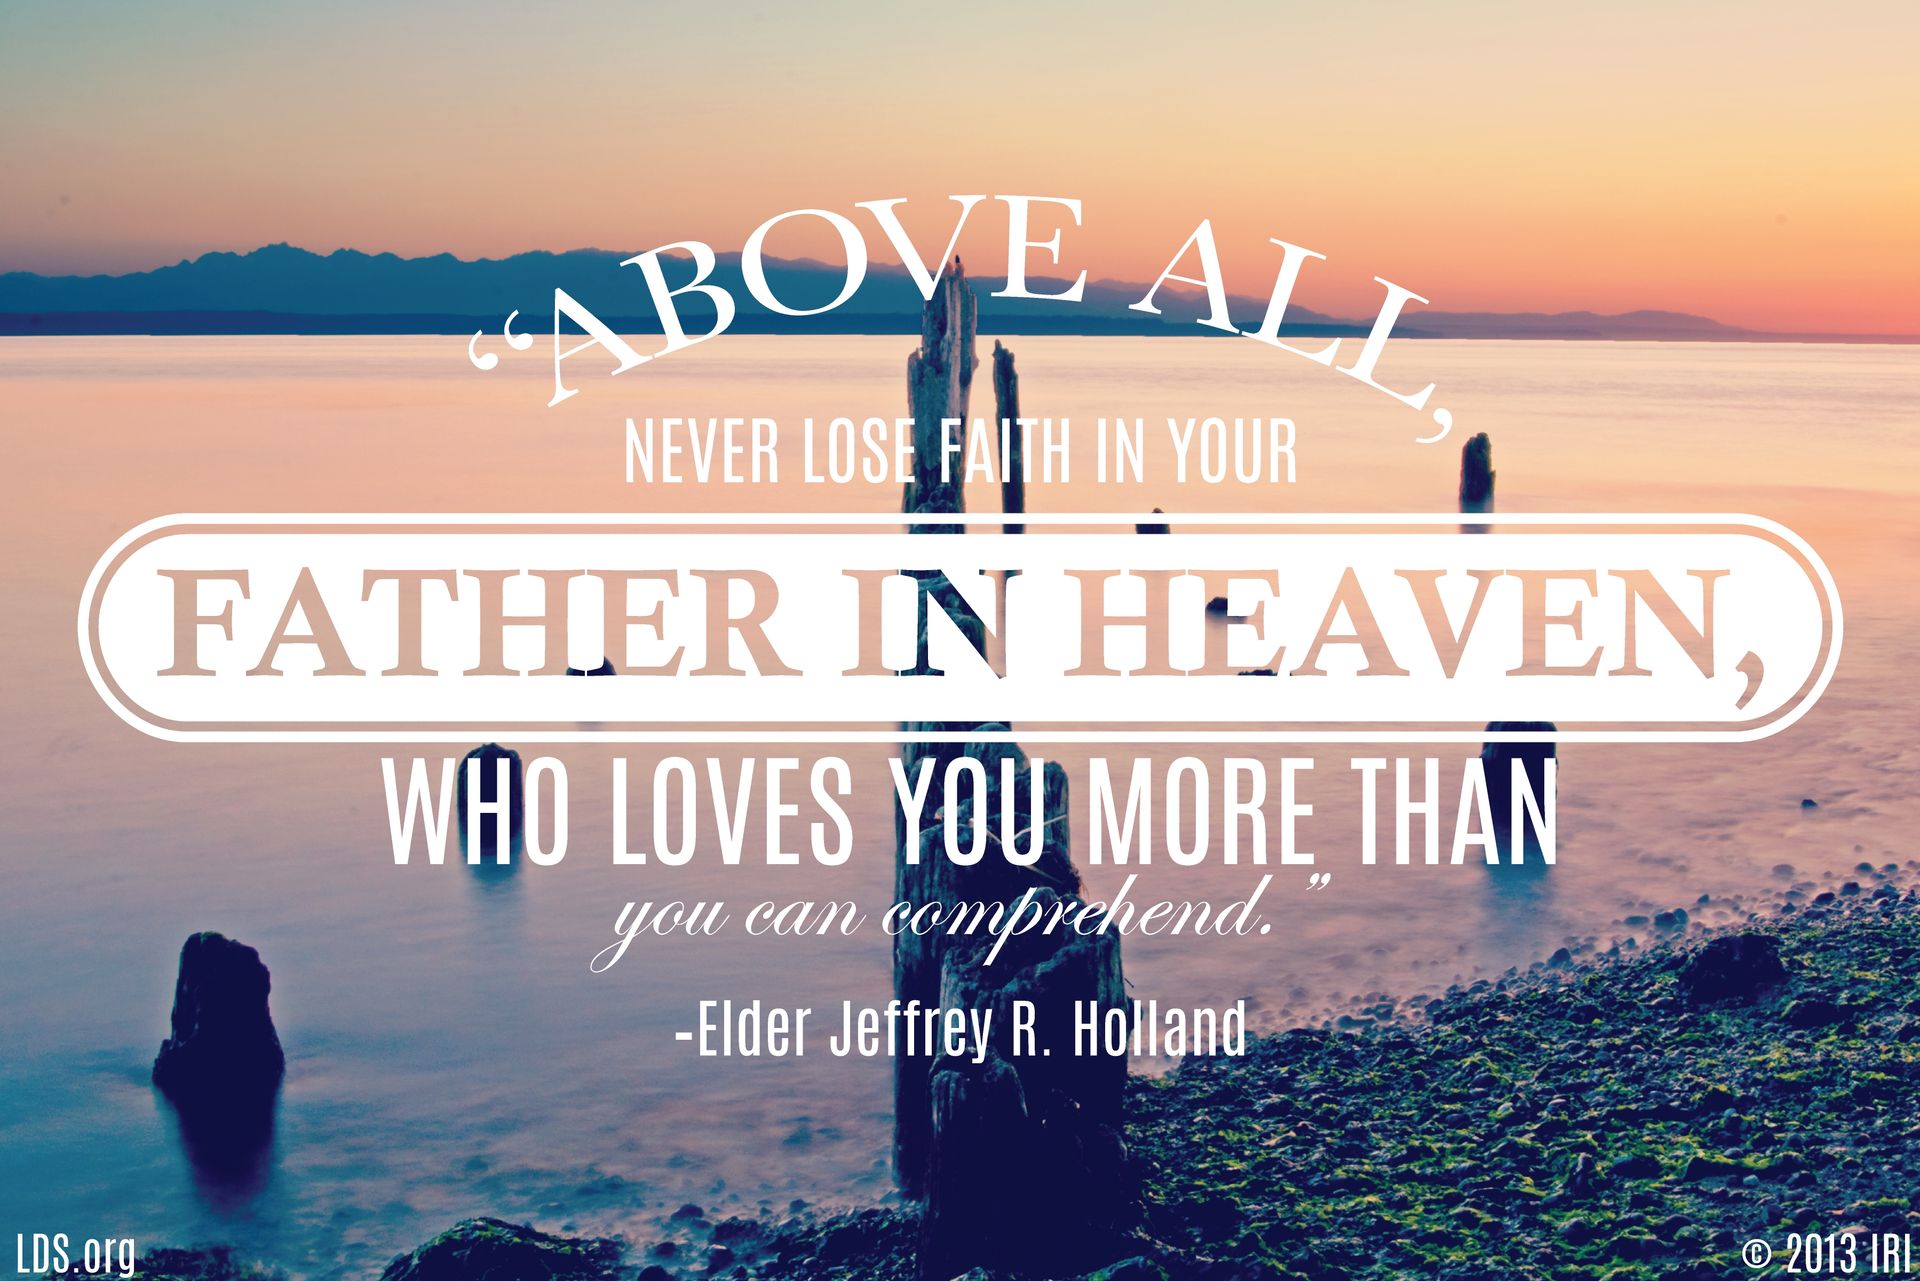 “Above all, never lose faith in your Father in Heaven, who loves you more than you can comprehend.”—Elder Jeffrey R. Holland, “Like a Broken Vessel” © undefined ipCode 1.